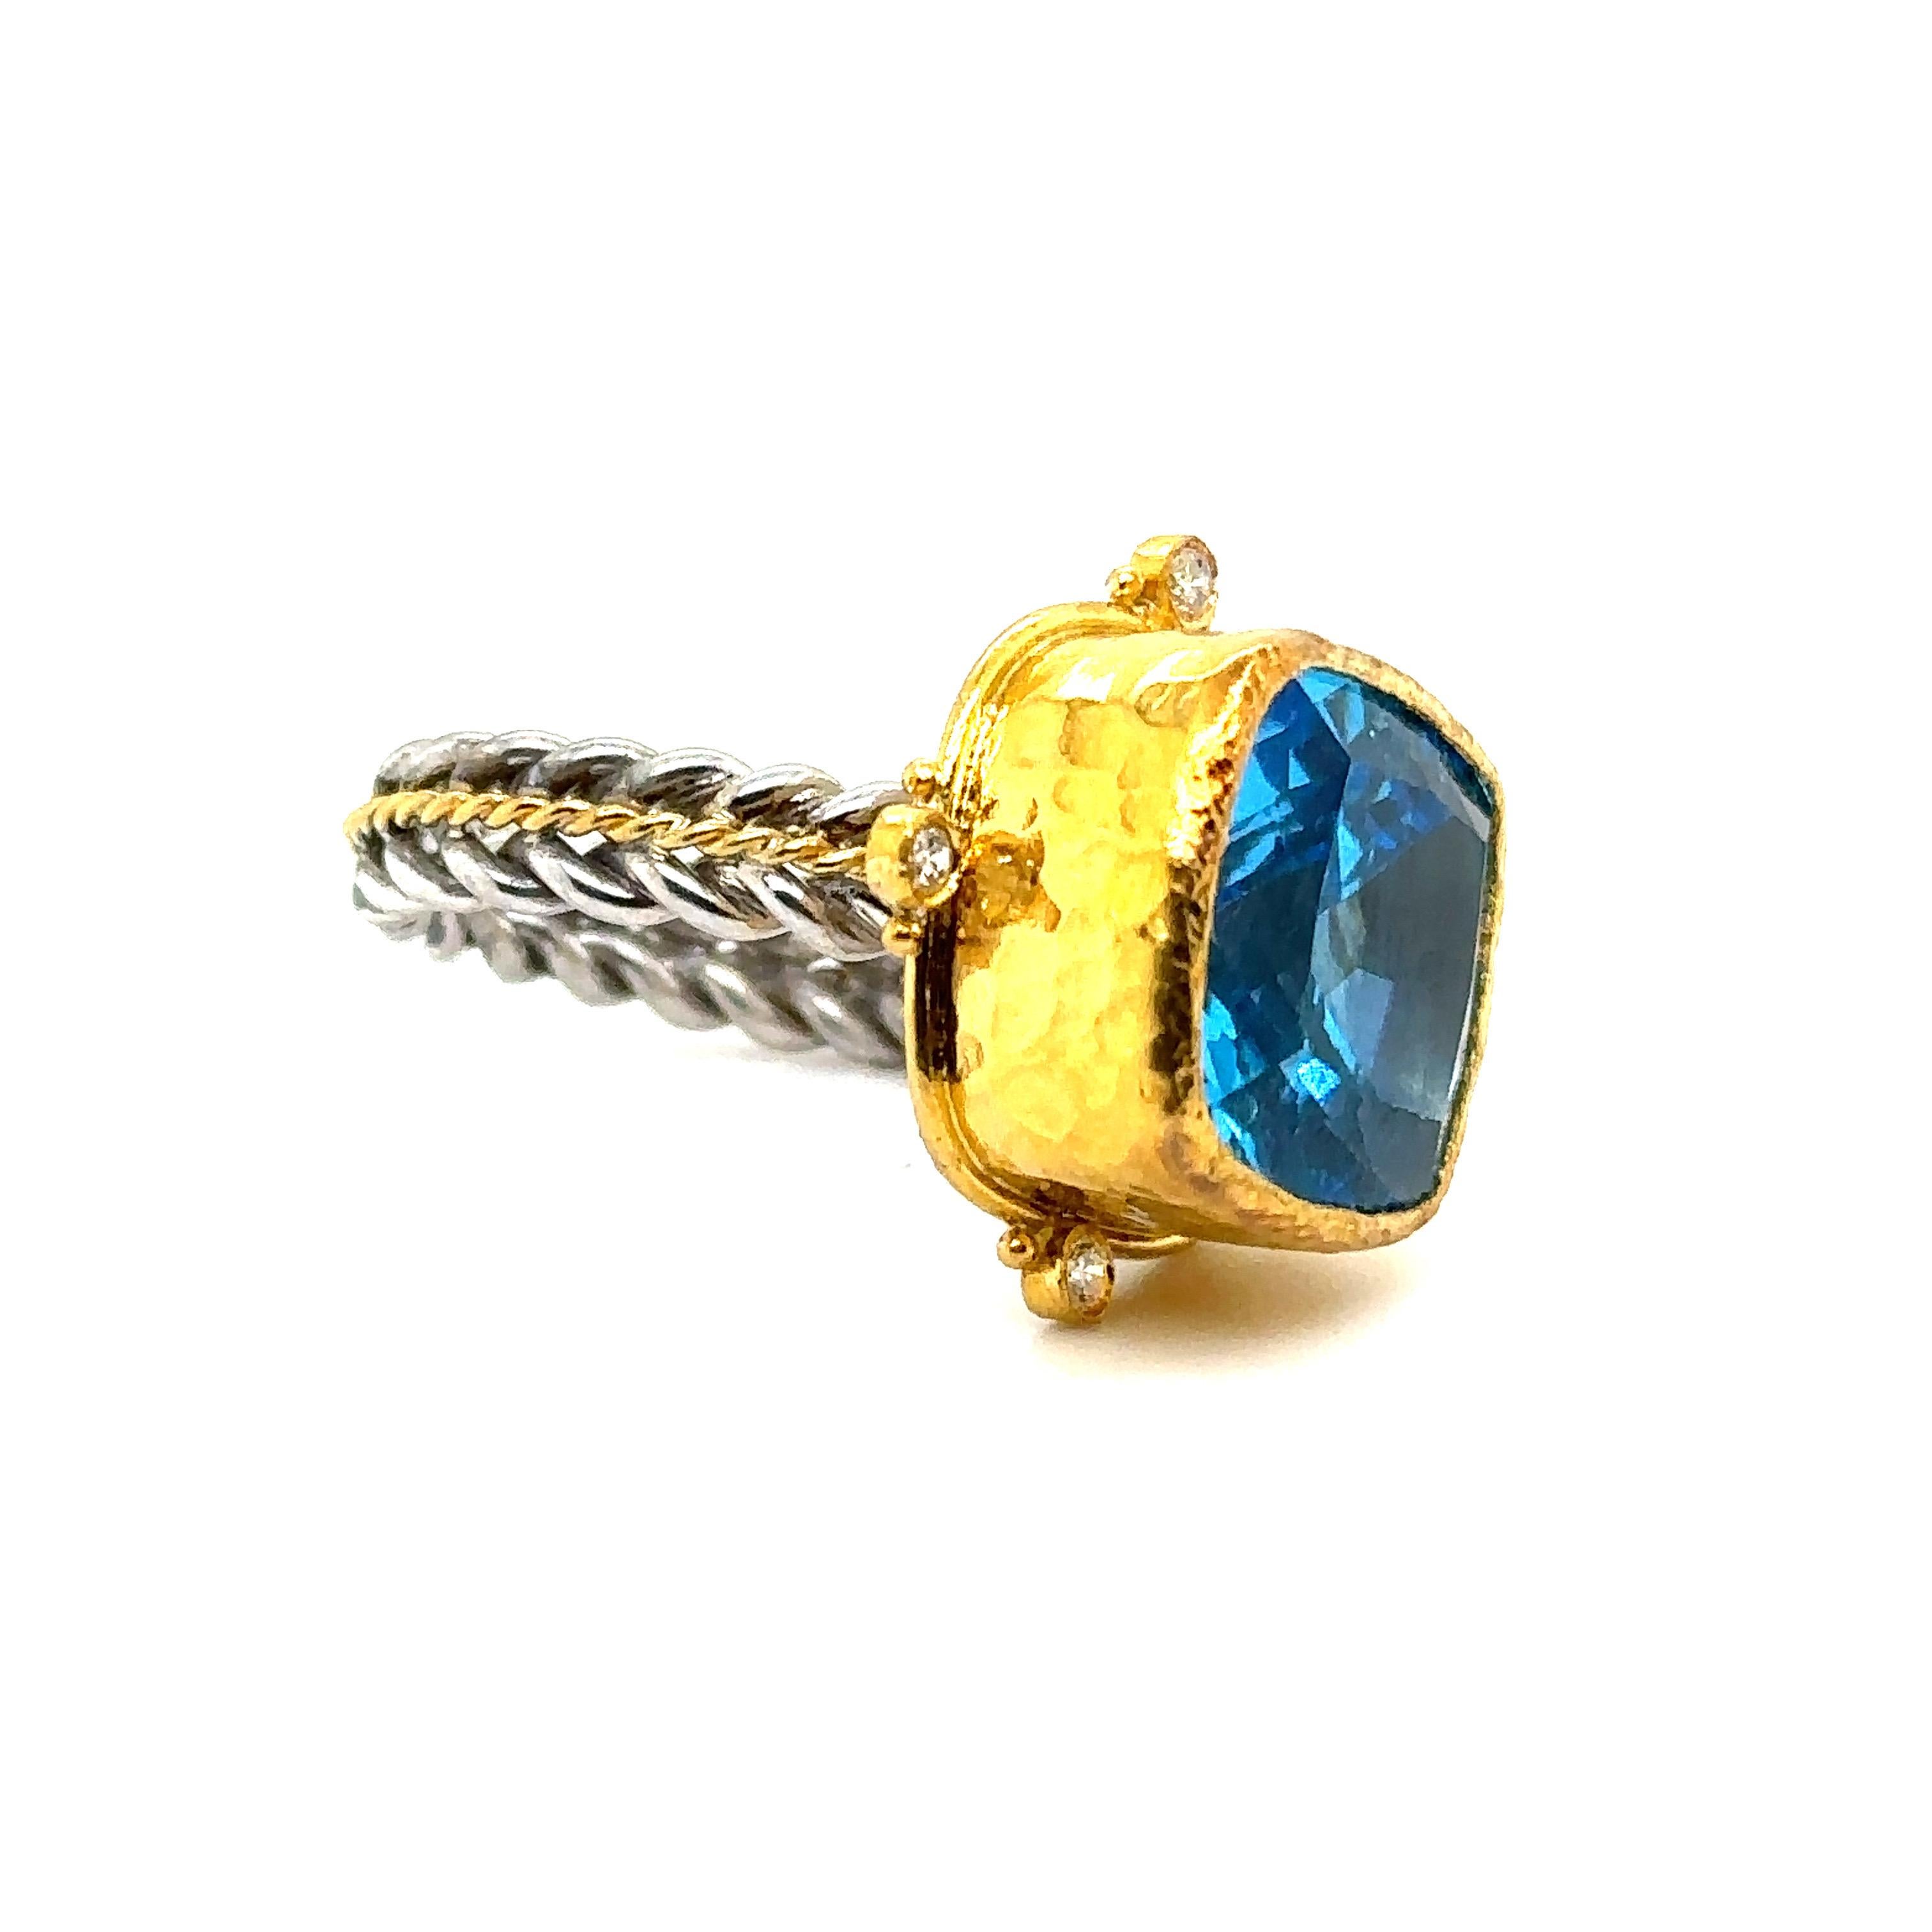 JAS-19-1995 - 24K GOLD/STERLING SILVER RING 0.10Ct DIAS.  For Sale 1